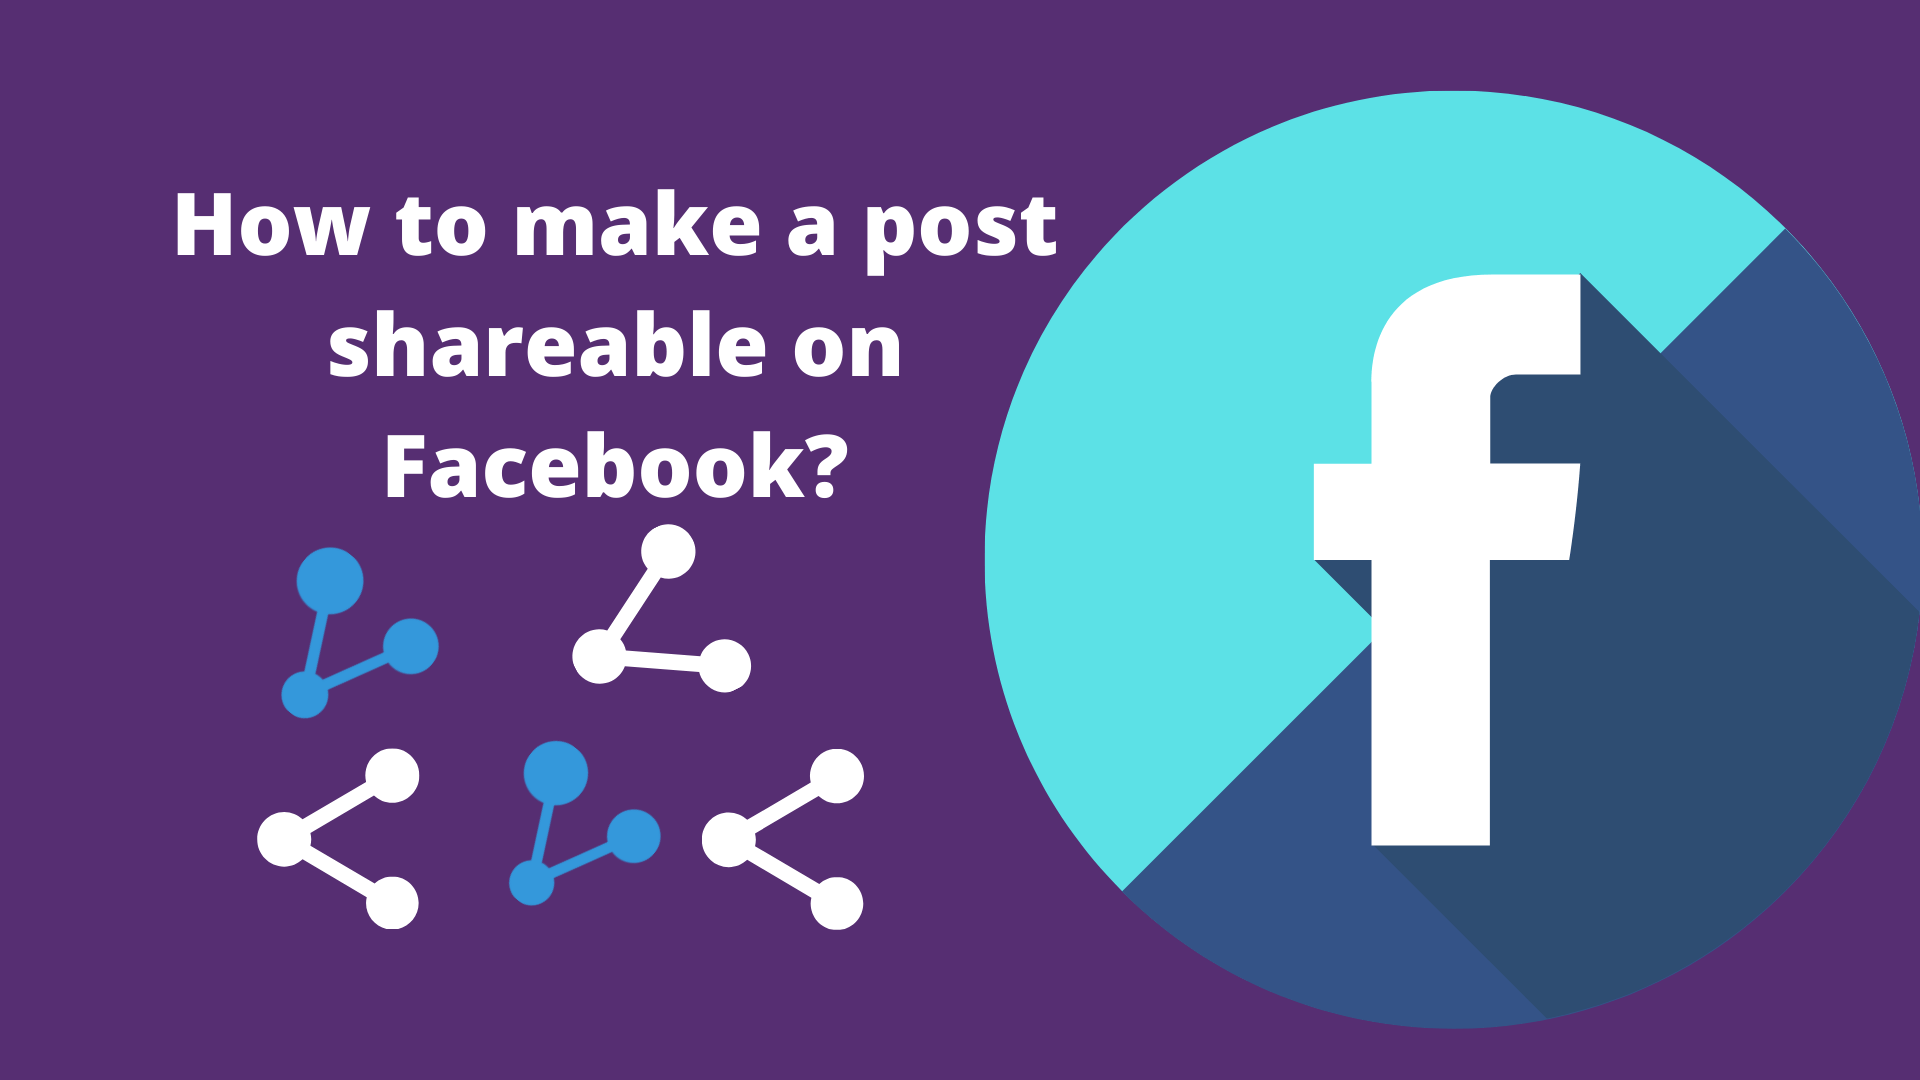 How to make a post shareable on Facebook